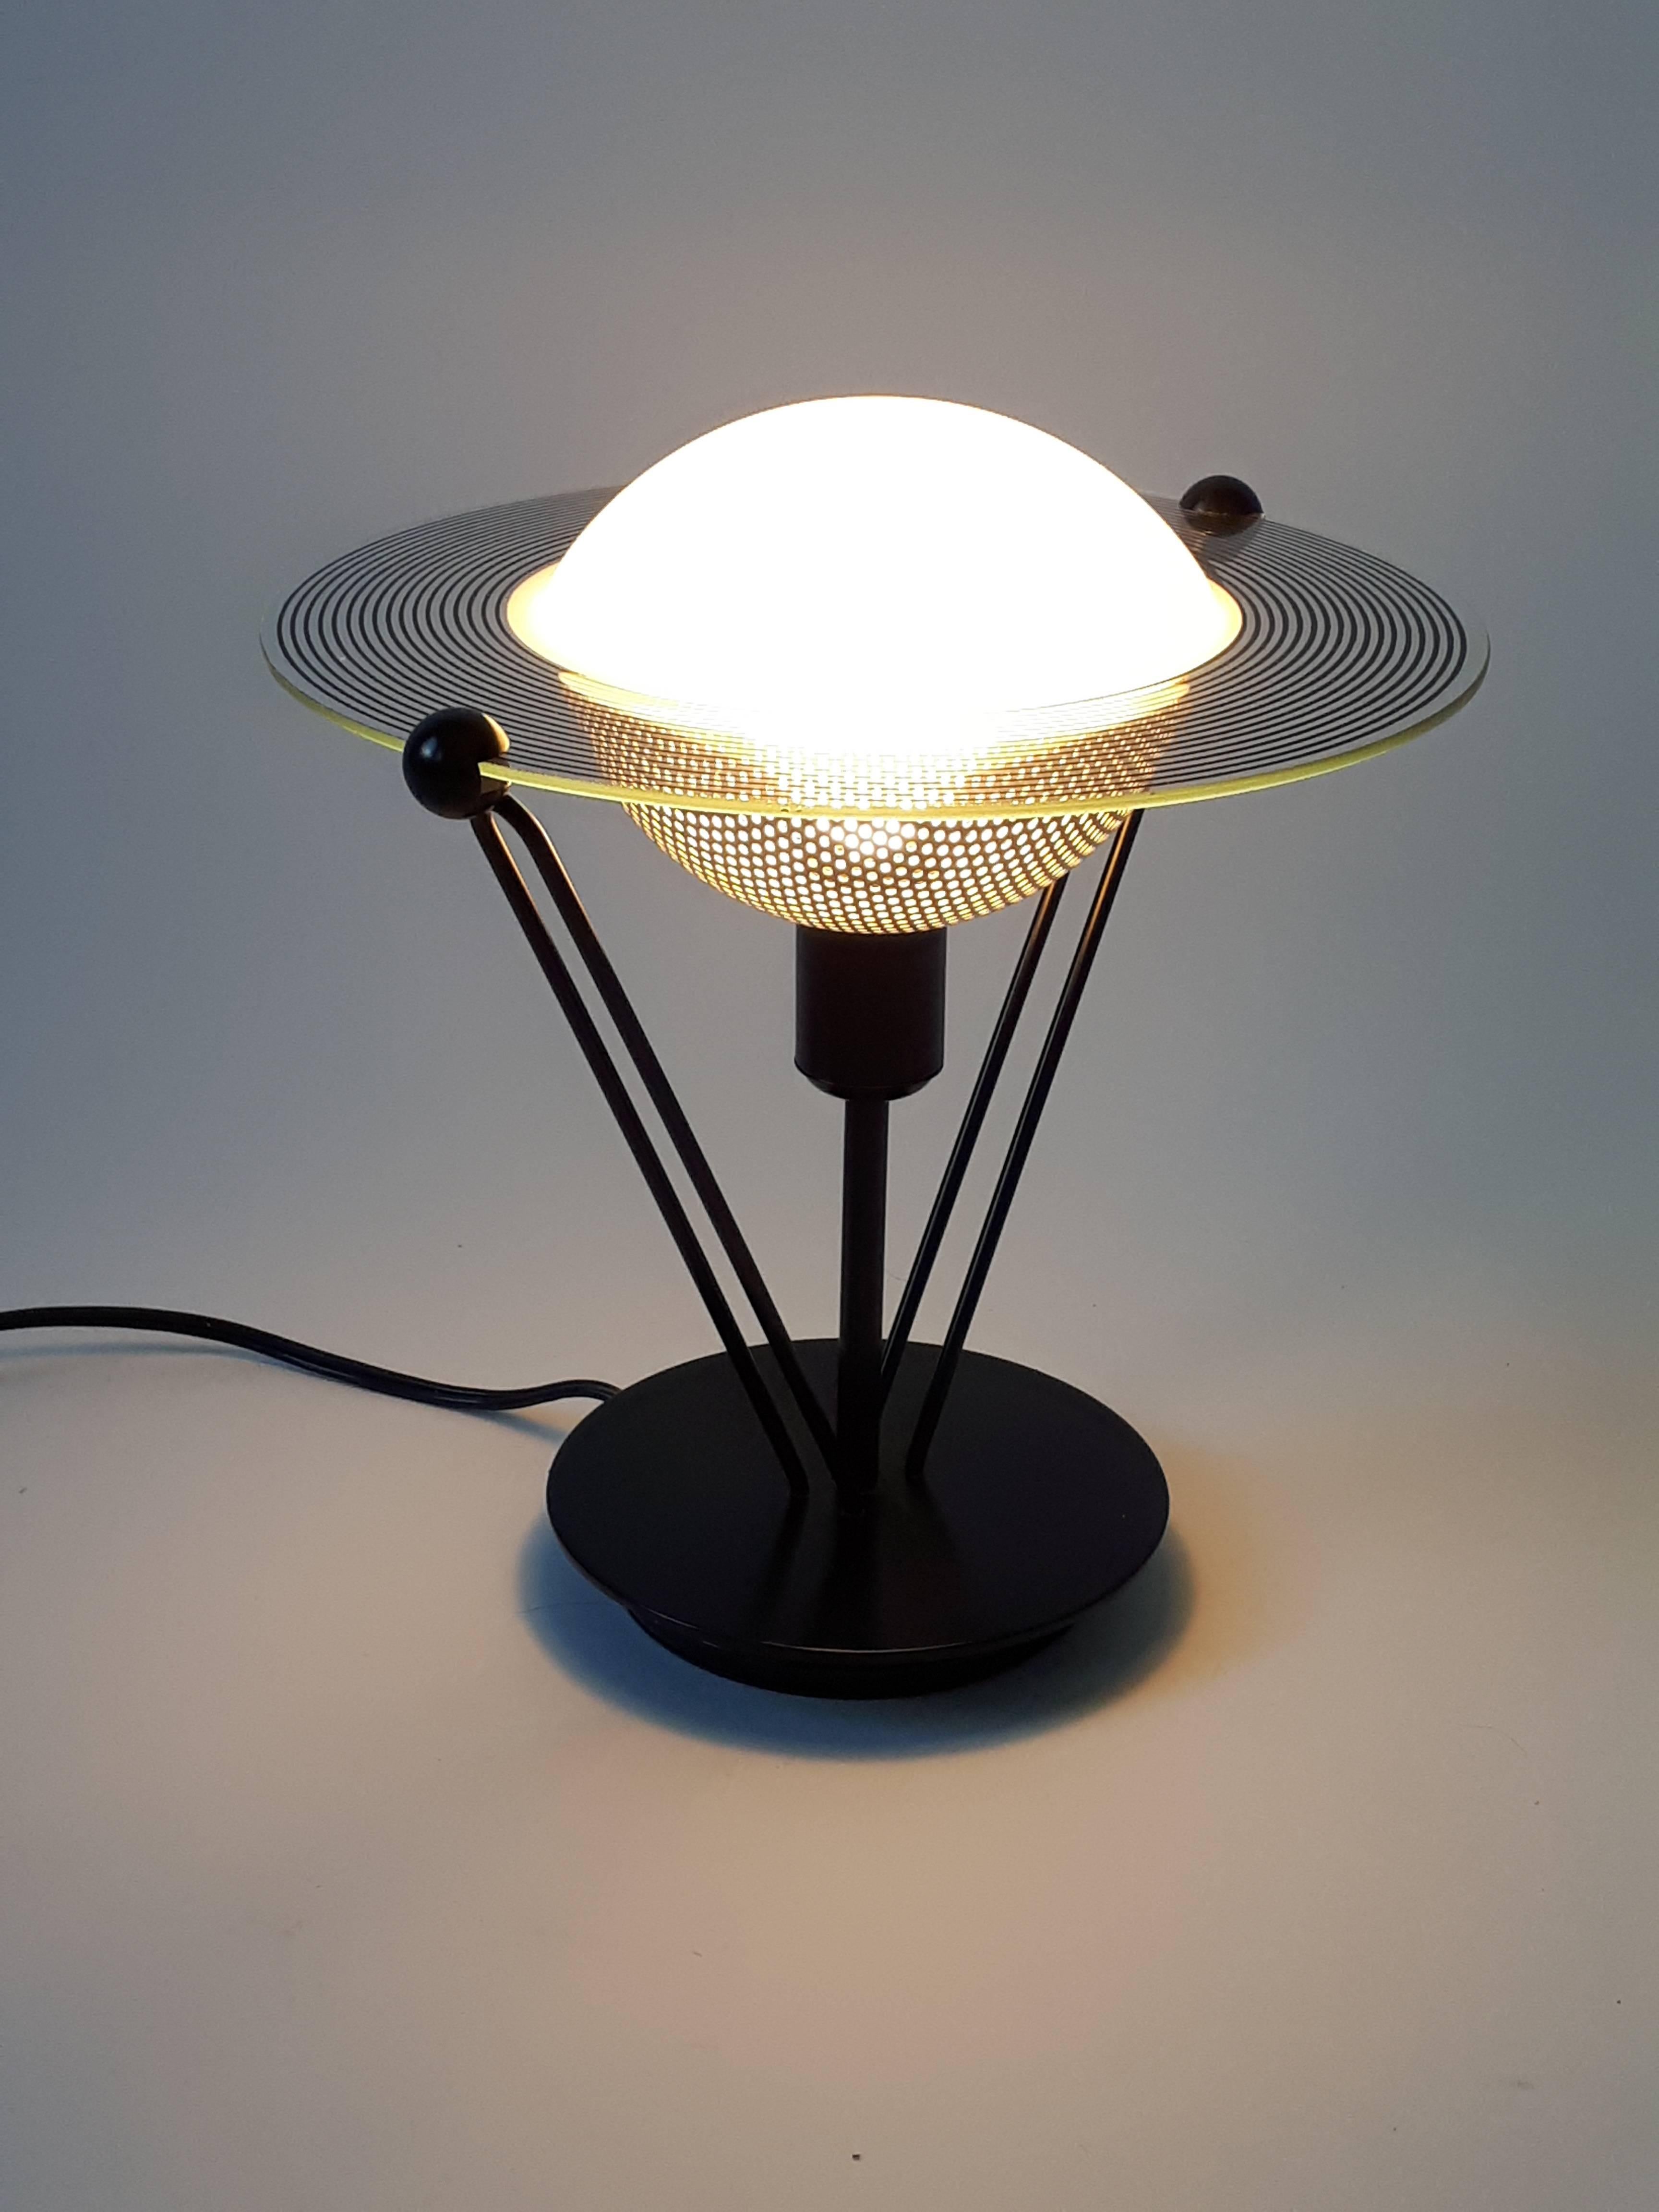 Small, solid and well made black semi-gloss metal base and structure.

Off white pierced grill under. 

Measure 10.5 inches high. 

Contain one E12 candelabra size light bulb rated at 60 watts max. 

Switch on cord.

Matching floor lamp